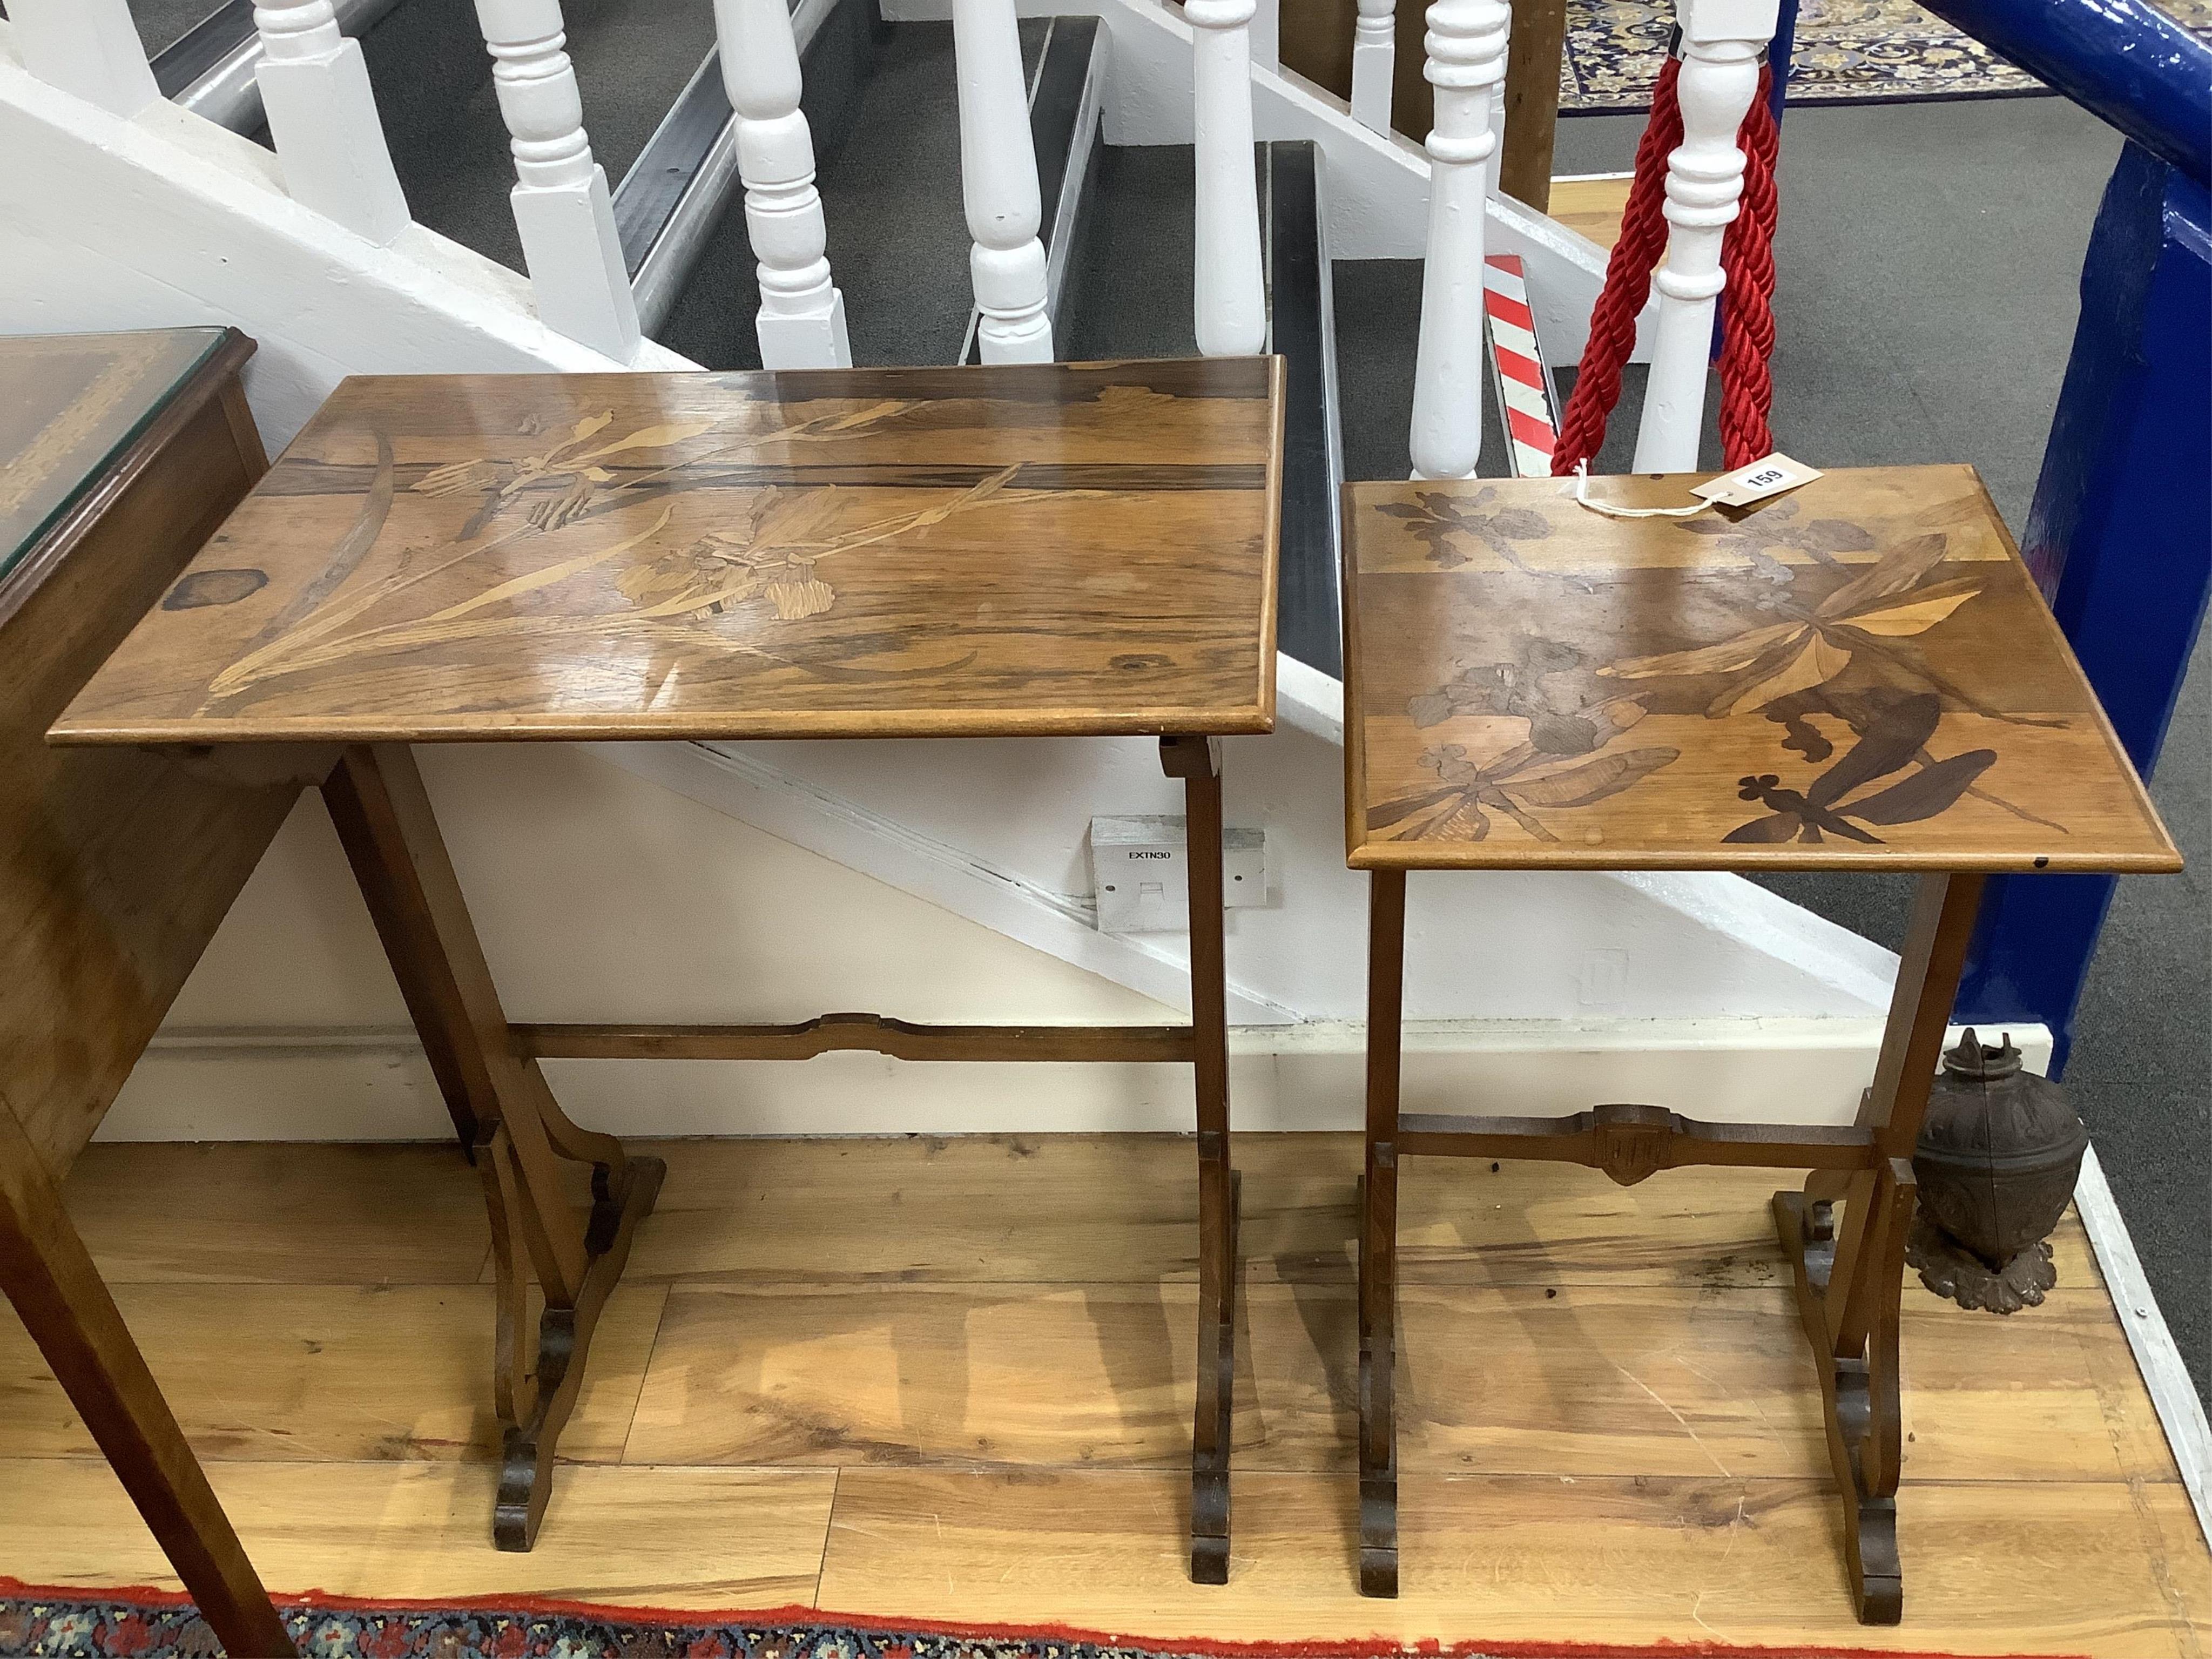 Two from a nest of early 20th century Galle style rosewood and marquetry tea tables, larger width 57cm, depth 38cm, height 70cm. Condition - fair